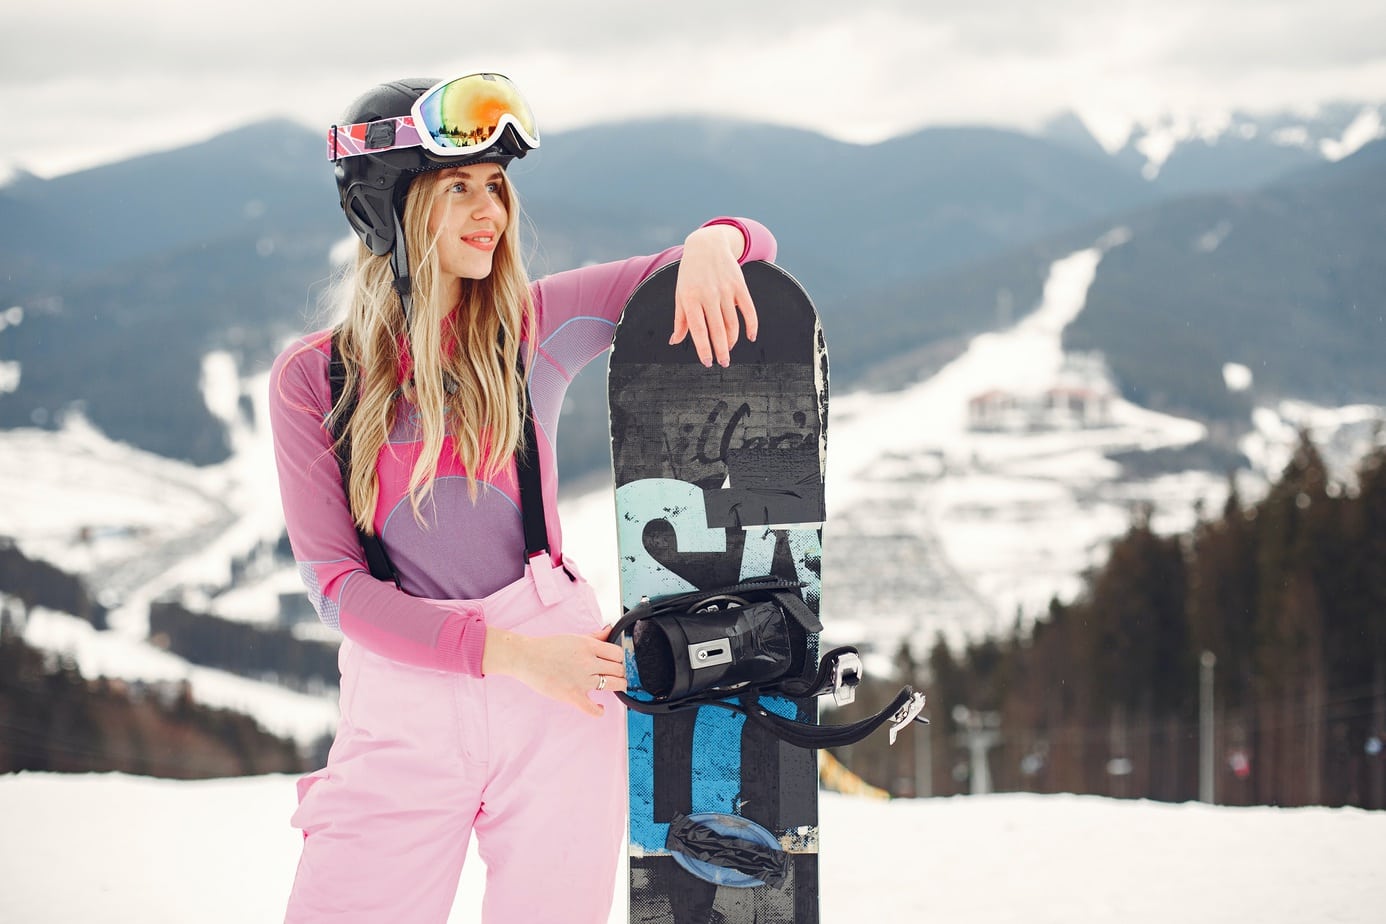 How do you take care of your skin on the slopes? Here are some valuable tips